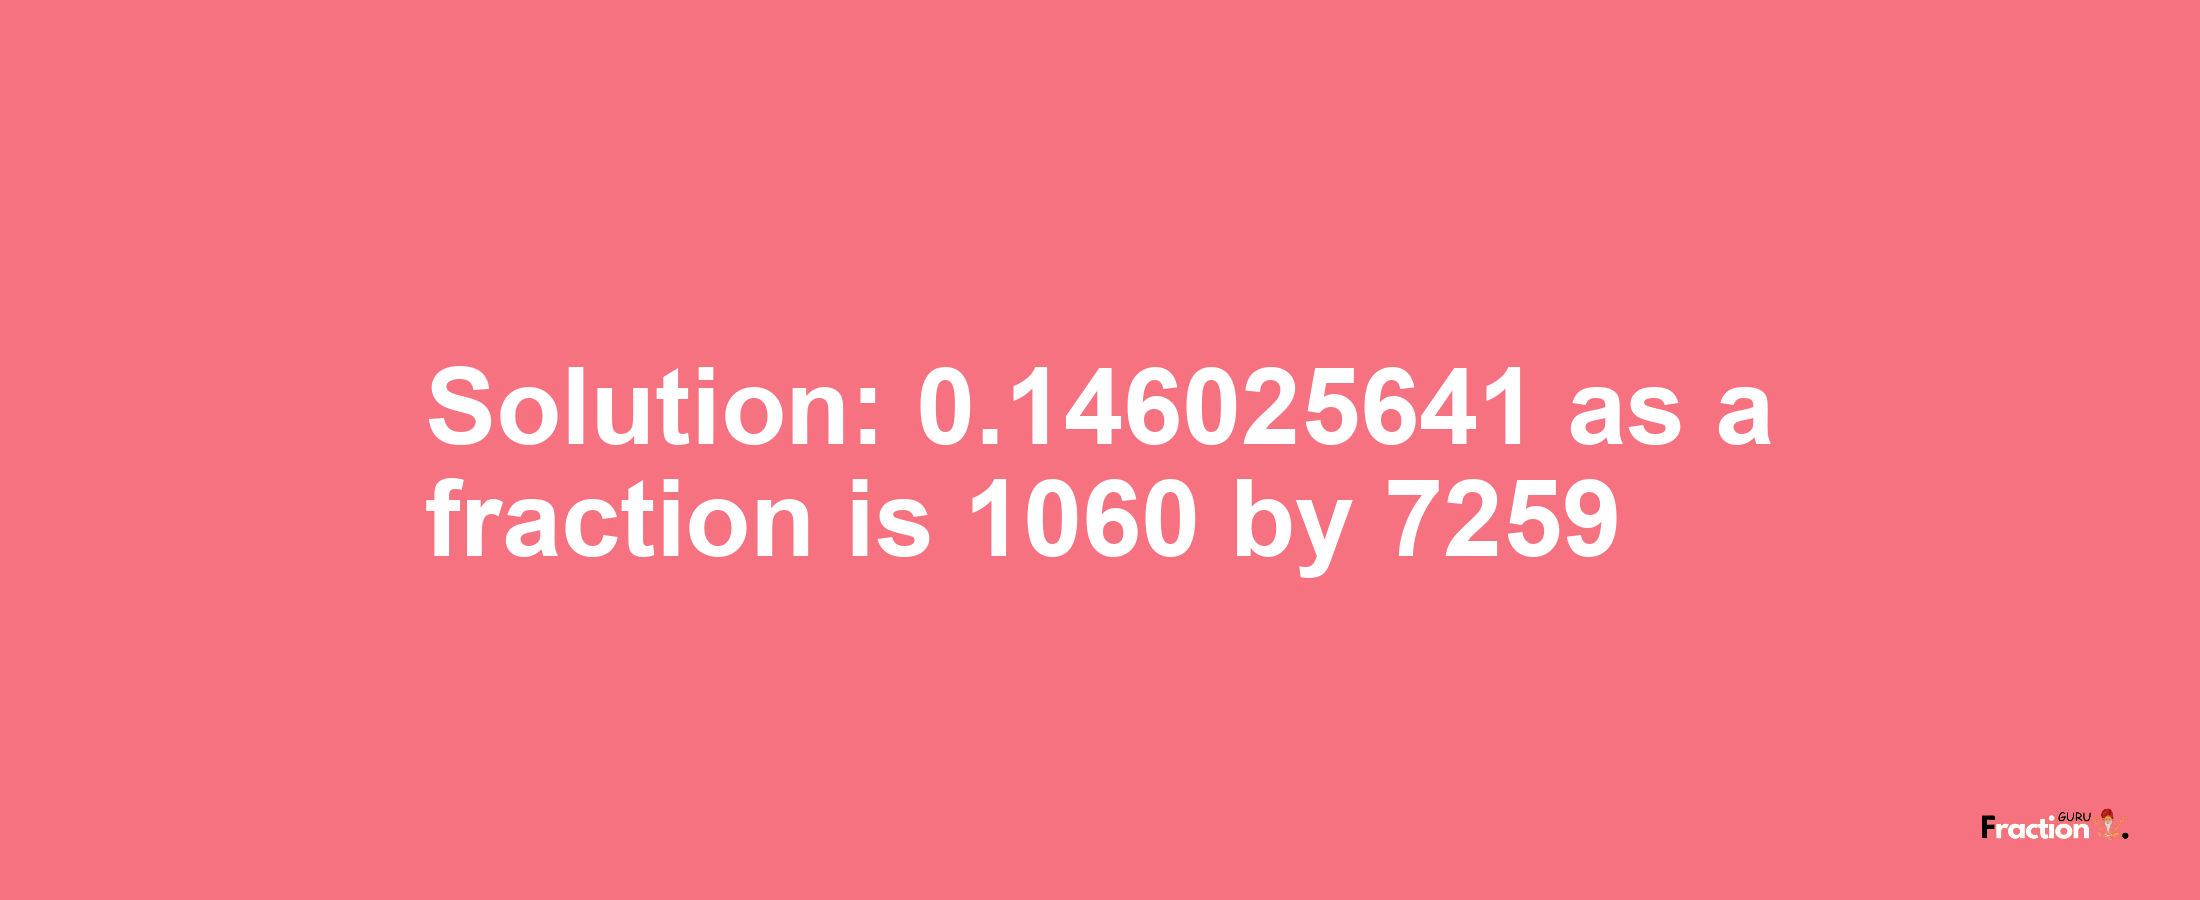 Solution:0.146025641 as a fraction is 1060/7259